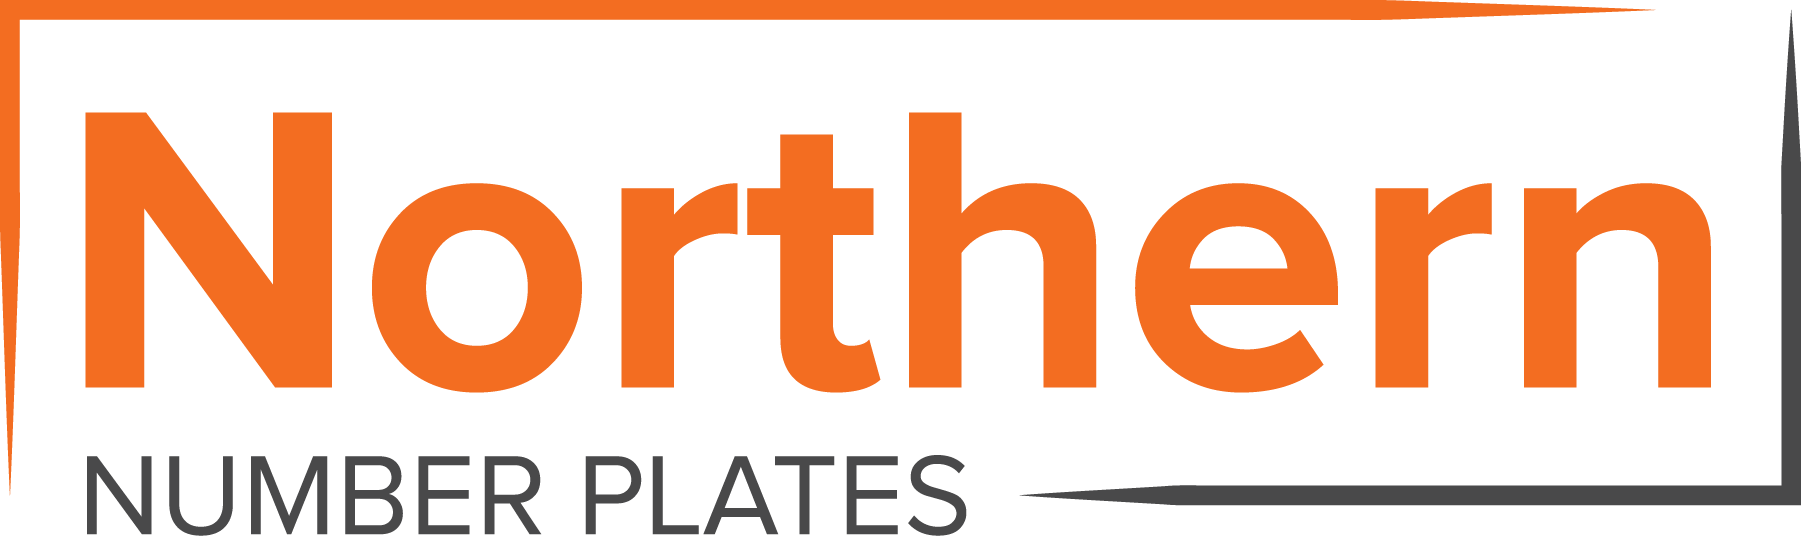 Northern Number Plates